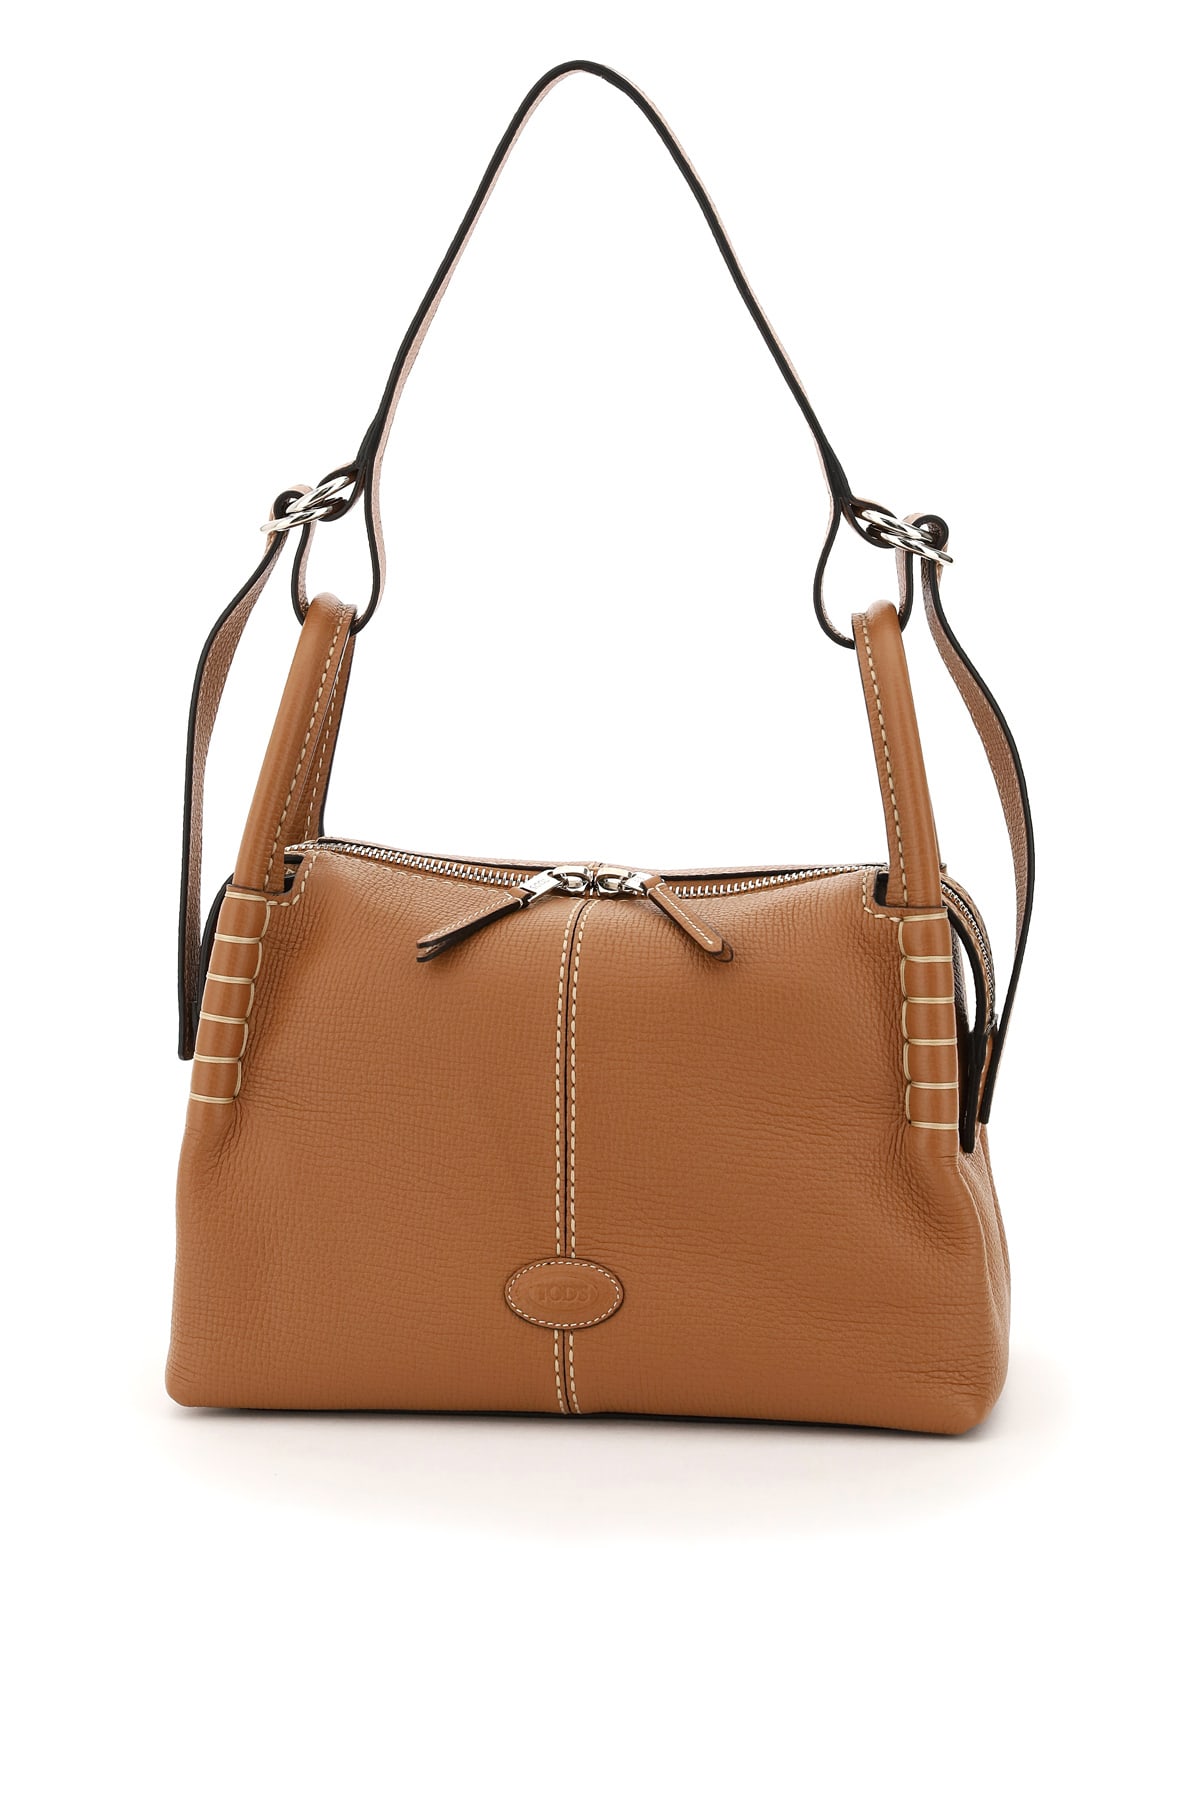 Tod's Small Leather Boston Bag | italist, ALWAYS LIKE A SALE